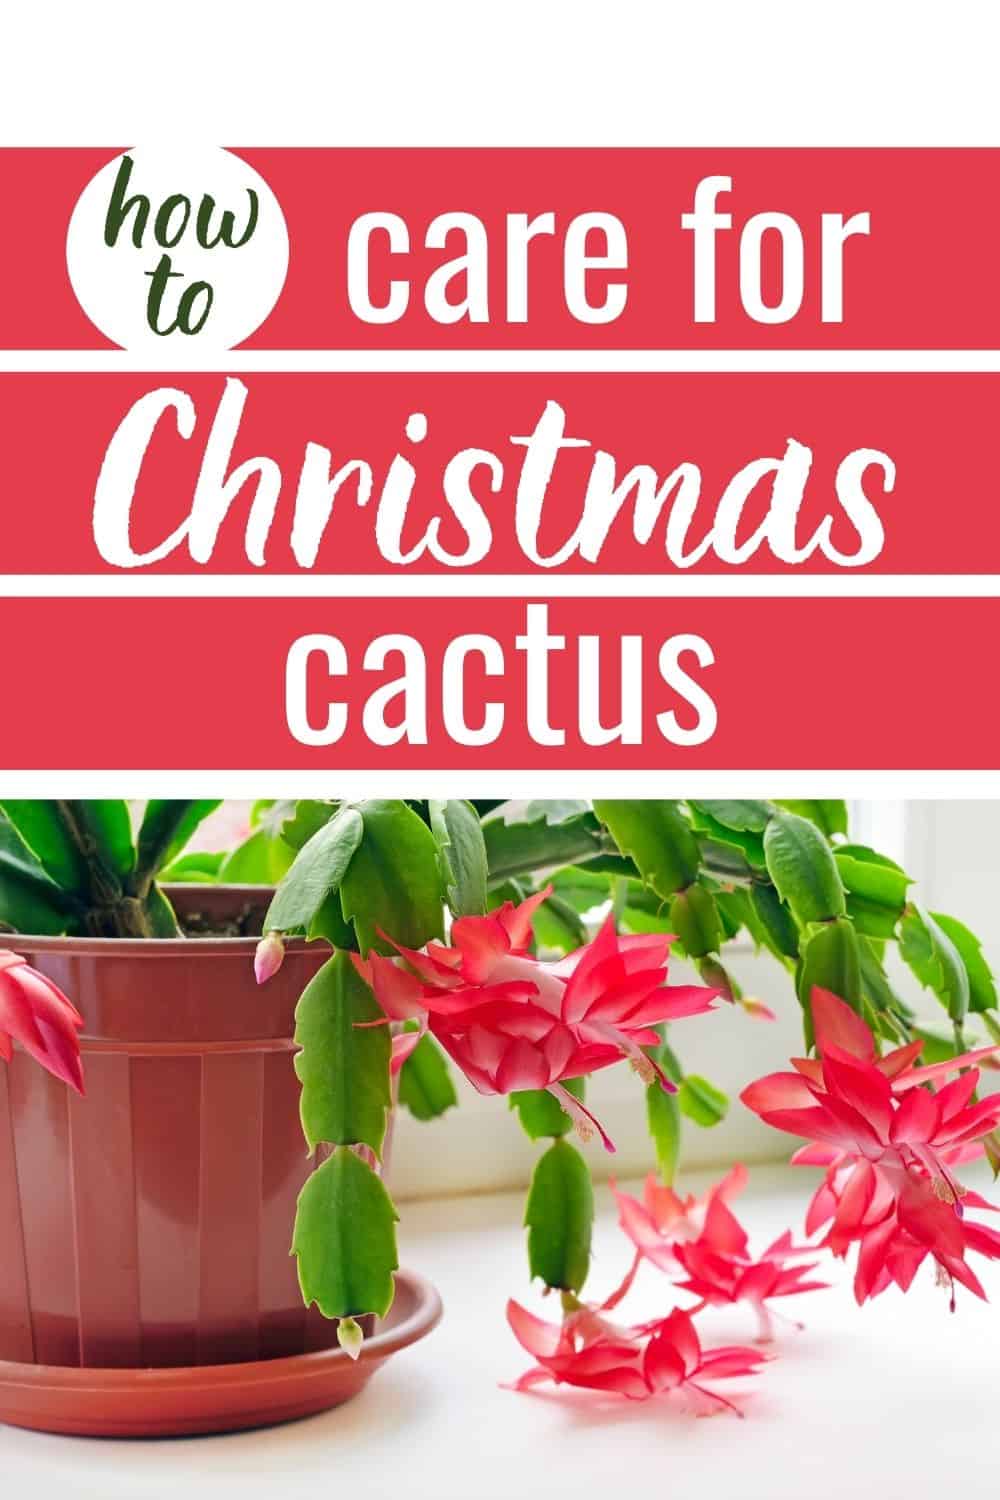 How to care for Christmas cactus